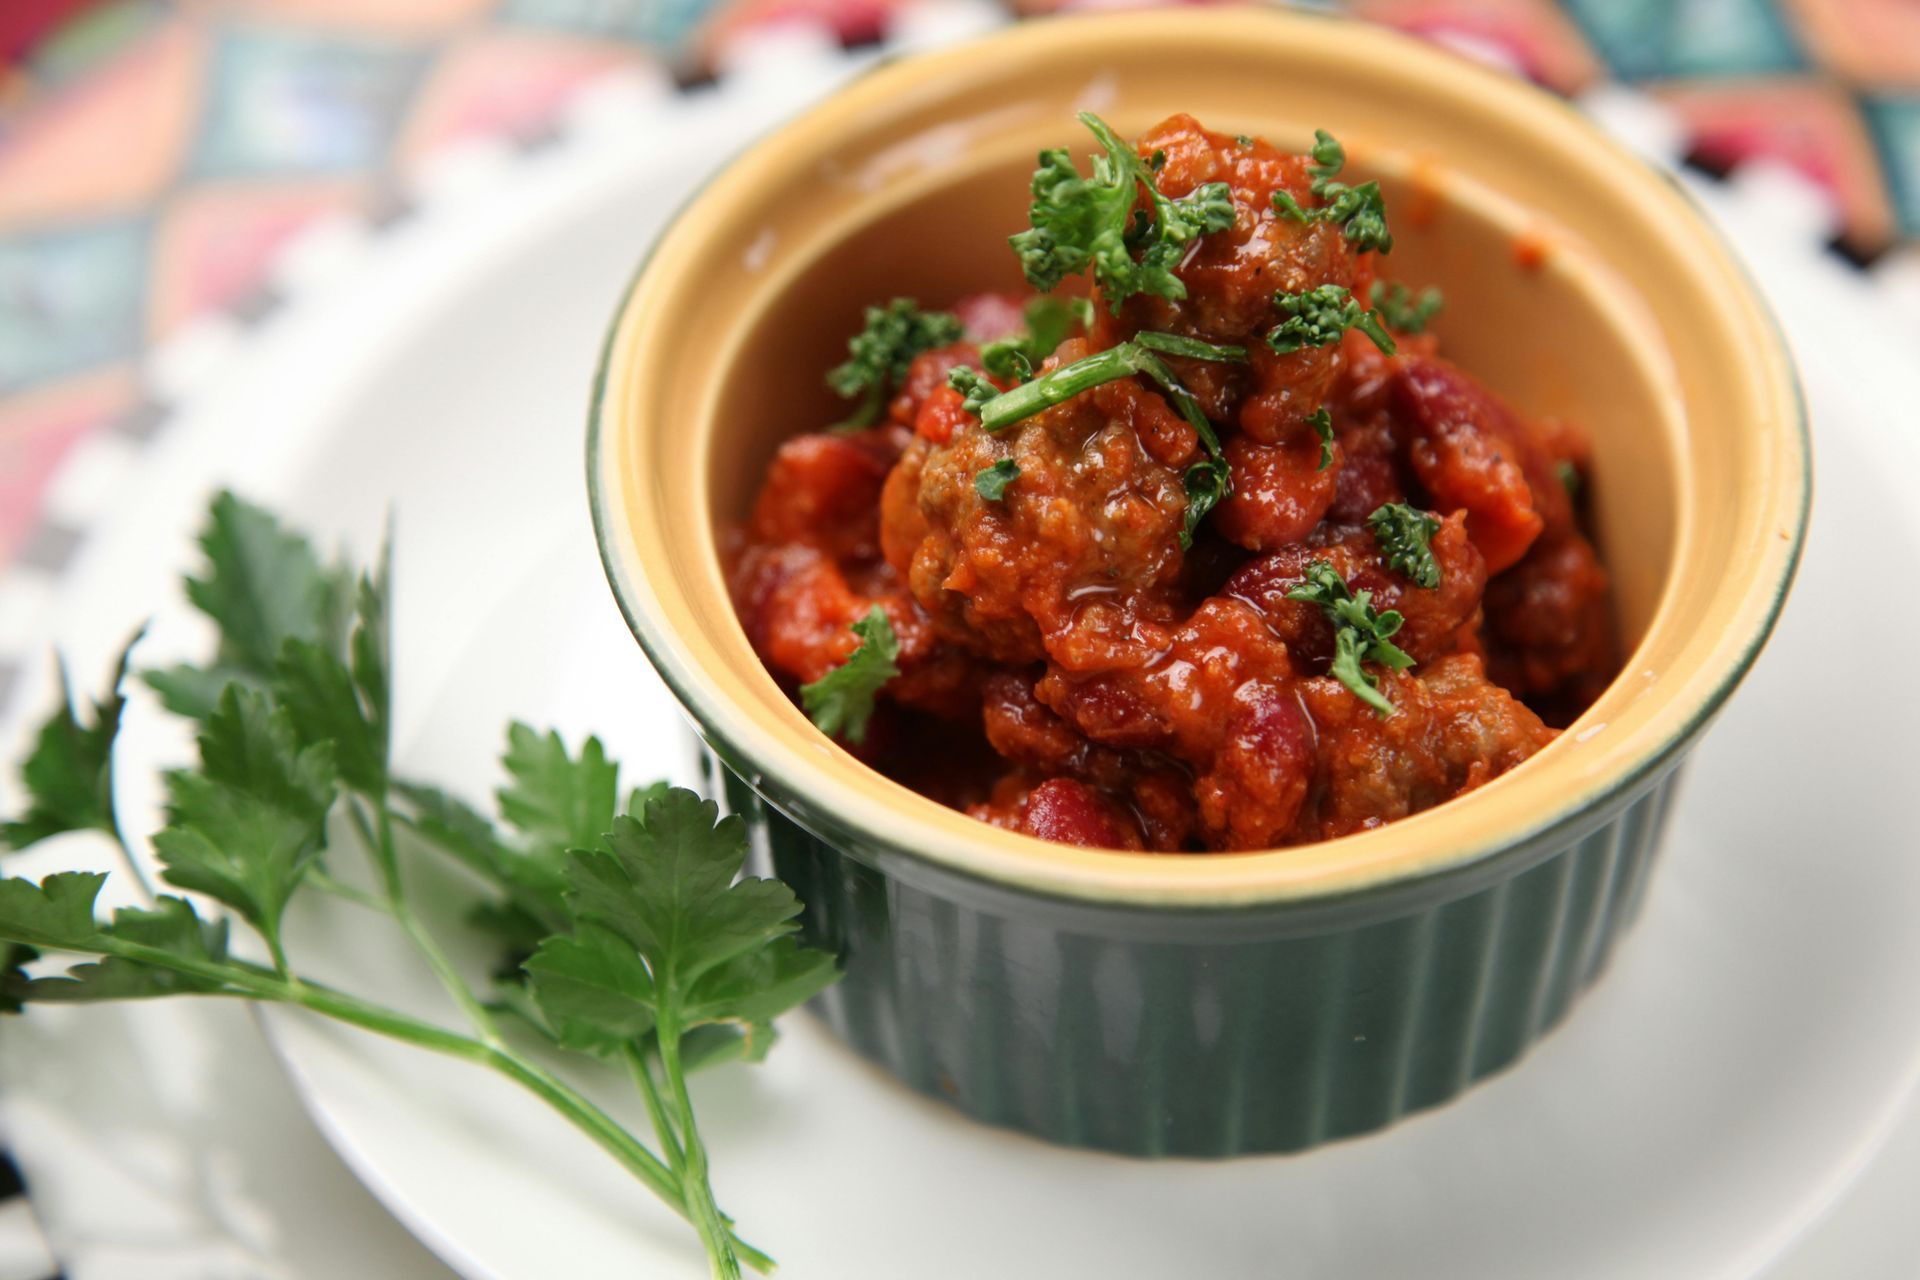 A bowl of chili with meat and beans garnished with parsley